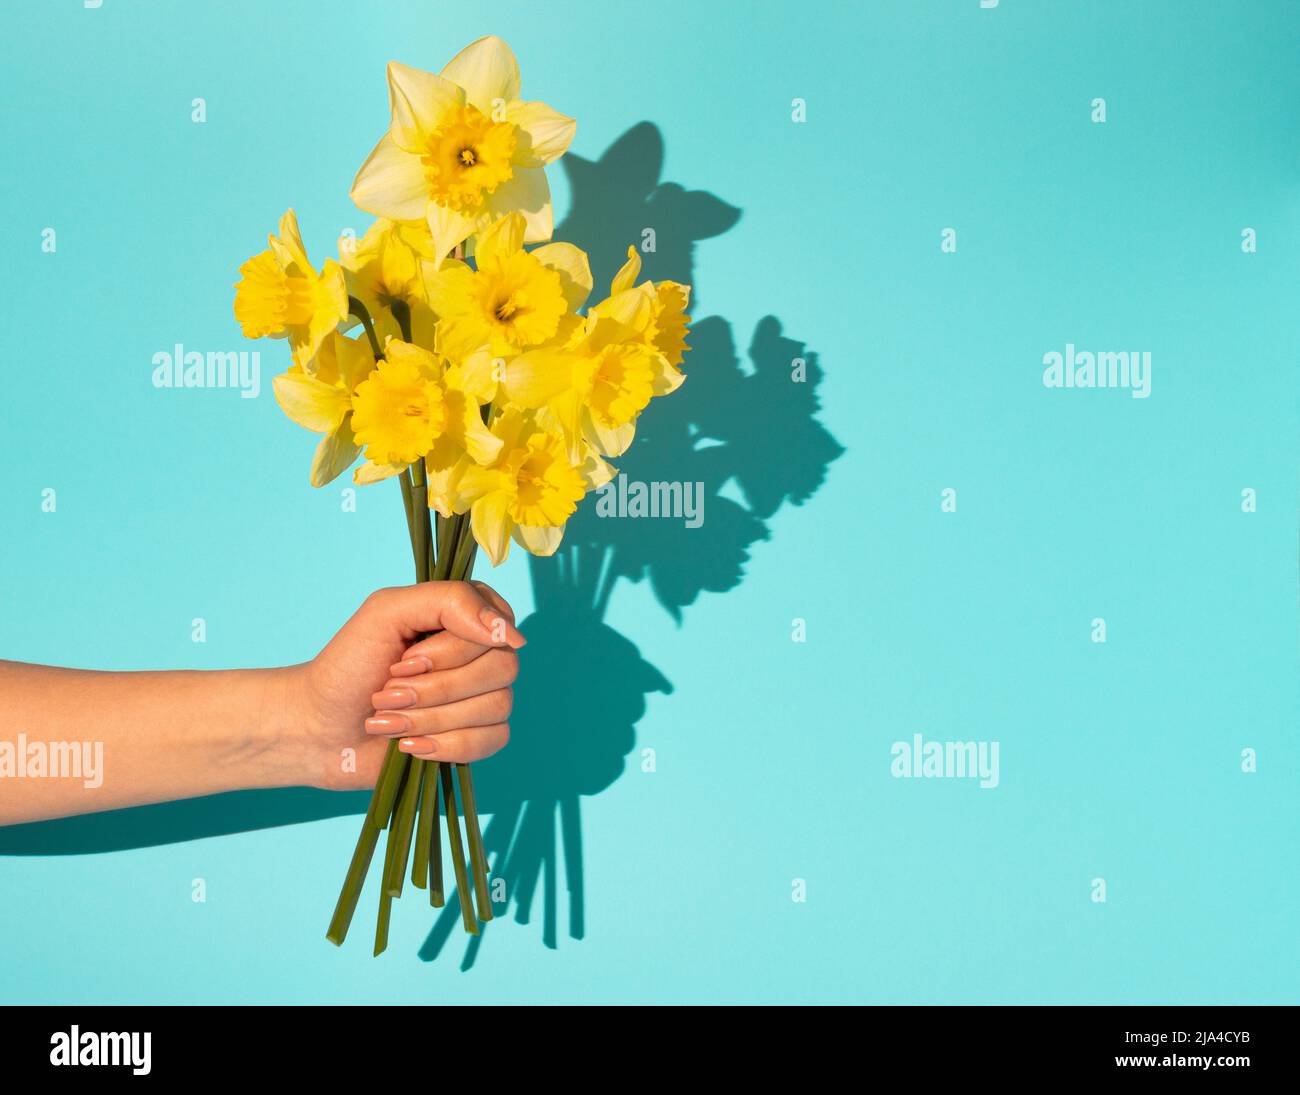 Woman's hand holding bouquet of blooming yellow narcissus flowers or daffodils on blue background. Minimal spring concept. 8 March card. Stock Photo